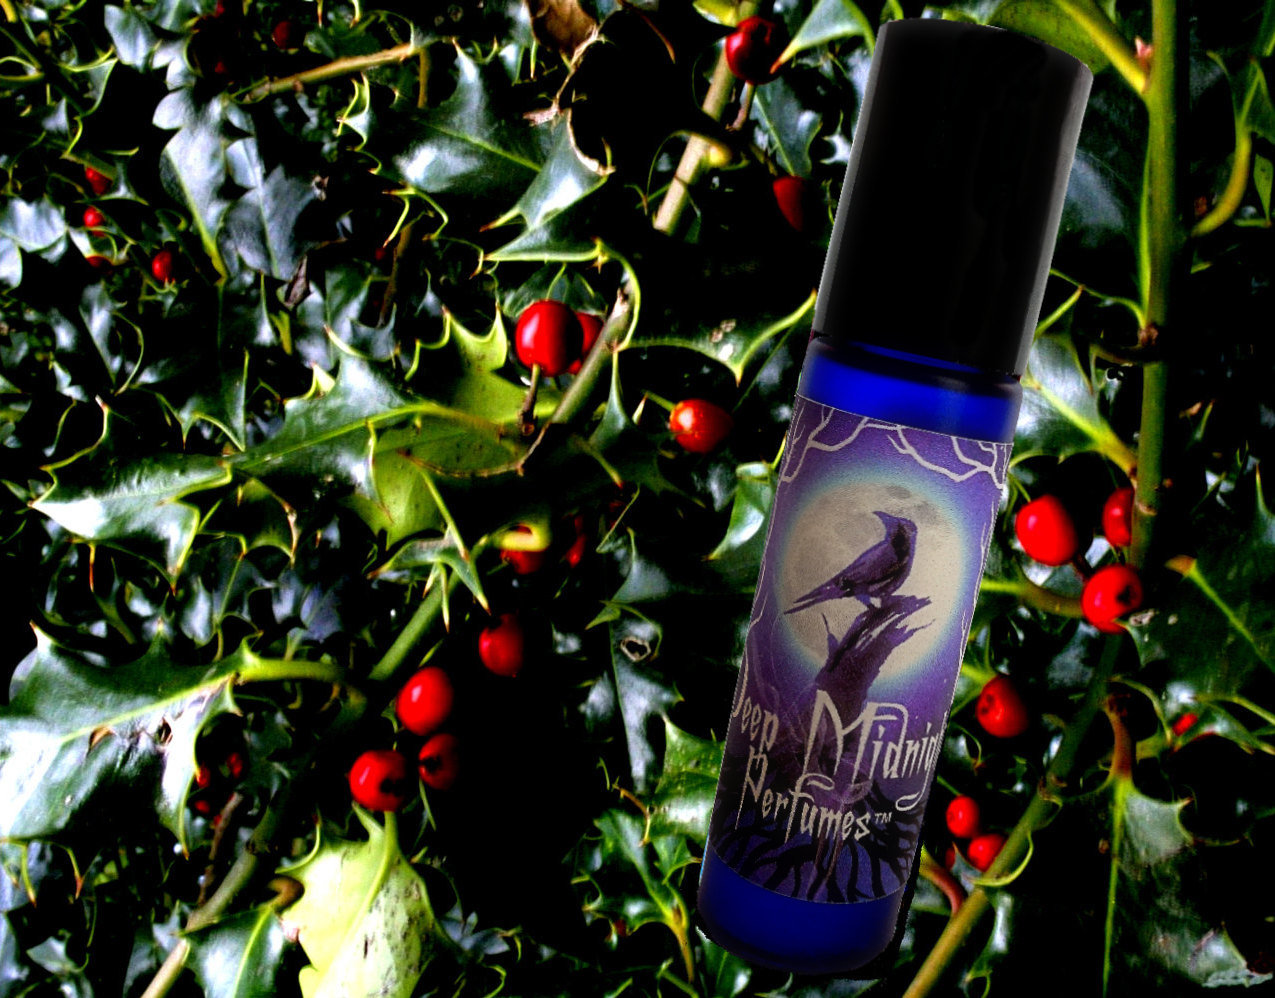 HOLLY and IVY Perfume Oil - Festive Hollyberries, Earthy Greens, Winter Forest - Victorian Perfume - Yule Perfume - Christmas Perfume